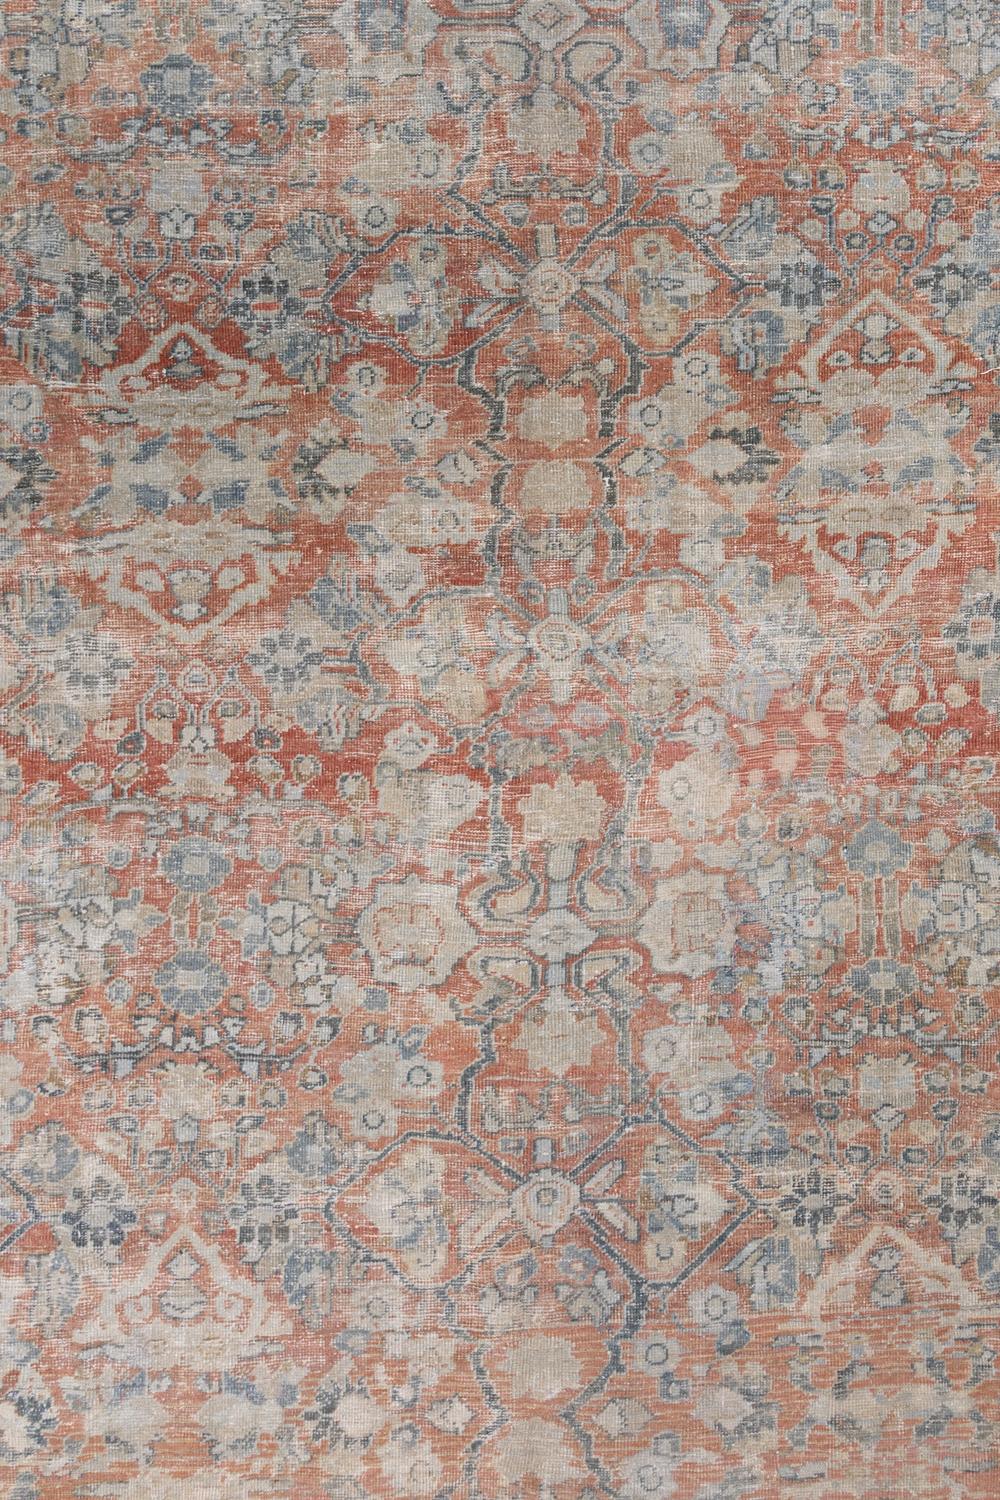 Age: Circa 1930

Pile: Medium

Wear Notes: 2

Material: Wool on Cotton. 

Vintage rugs are made by hand over the course of months, sometimes years. Their imperfections and wear are evidence of the hard working human hands that made them and